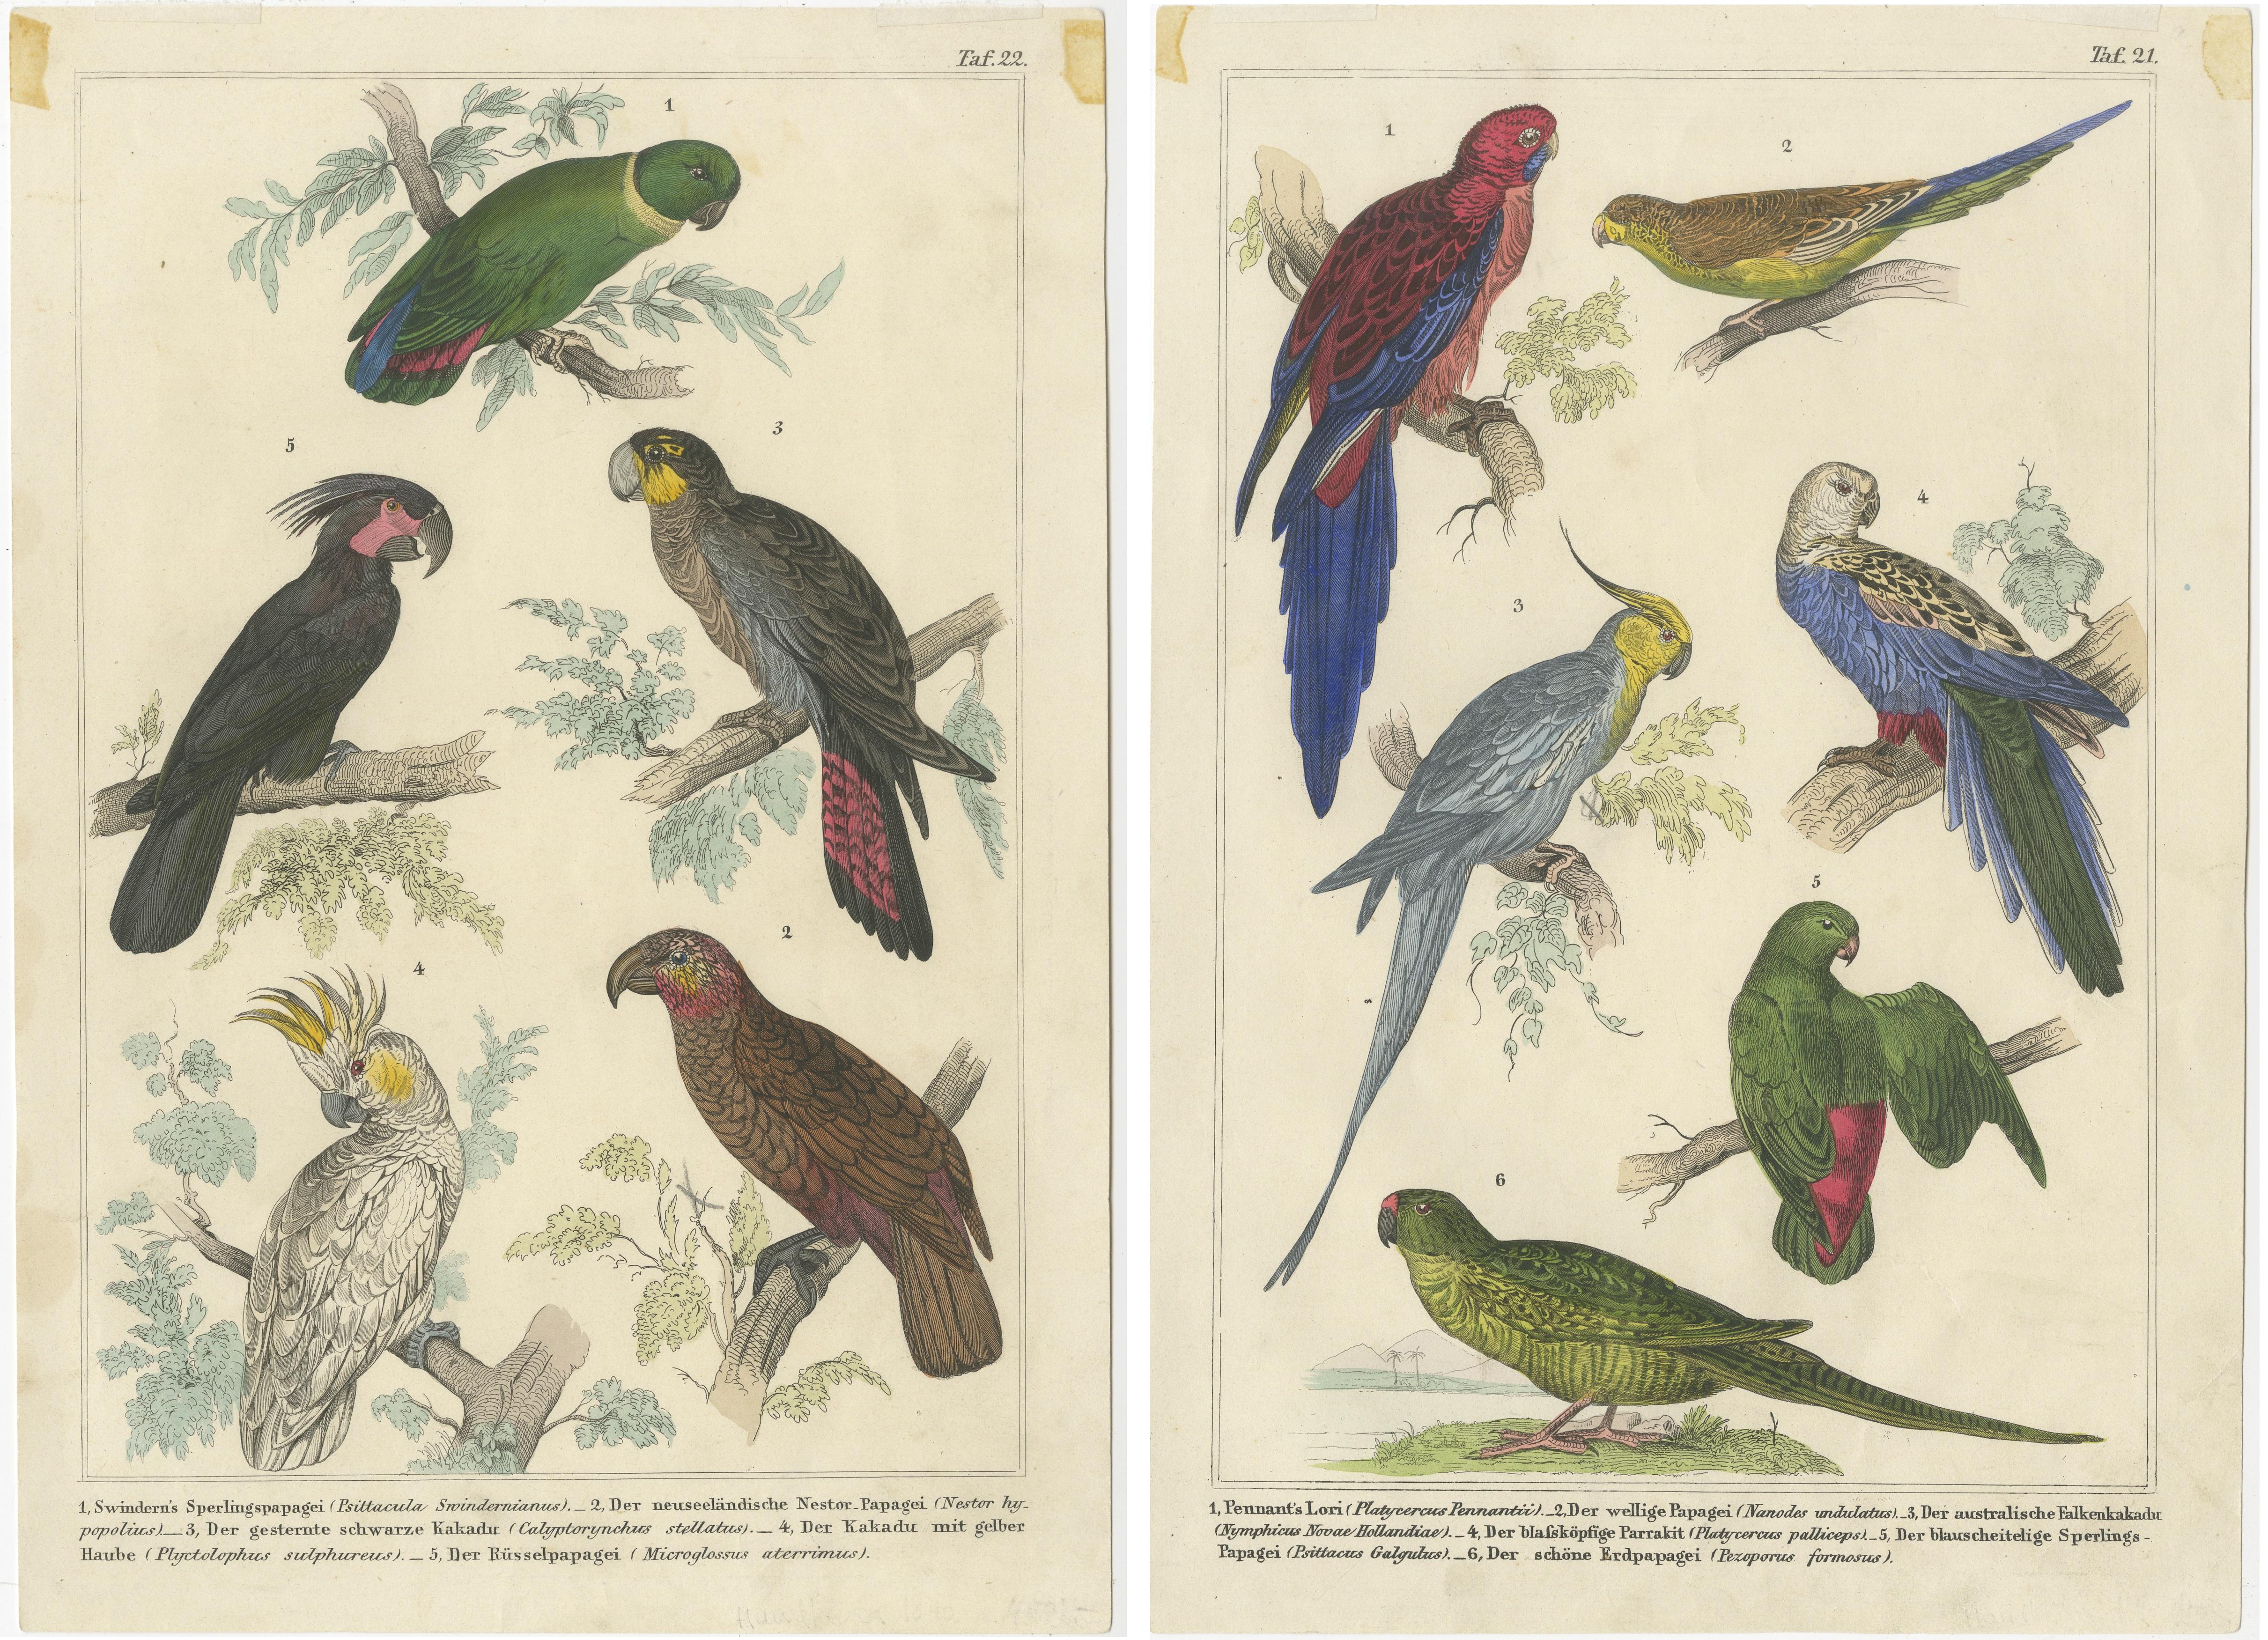 The two images for sale are intricate illustrations of various species of parrots, rendered in a style that's characteristic of the 19th-century scientific prints. They are labeled in German with both common and scientific names, and appear to be